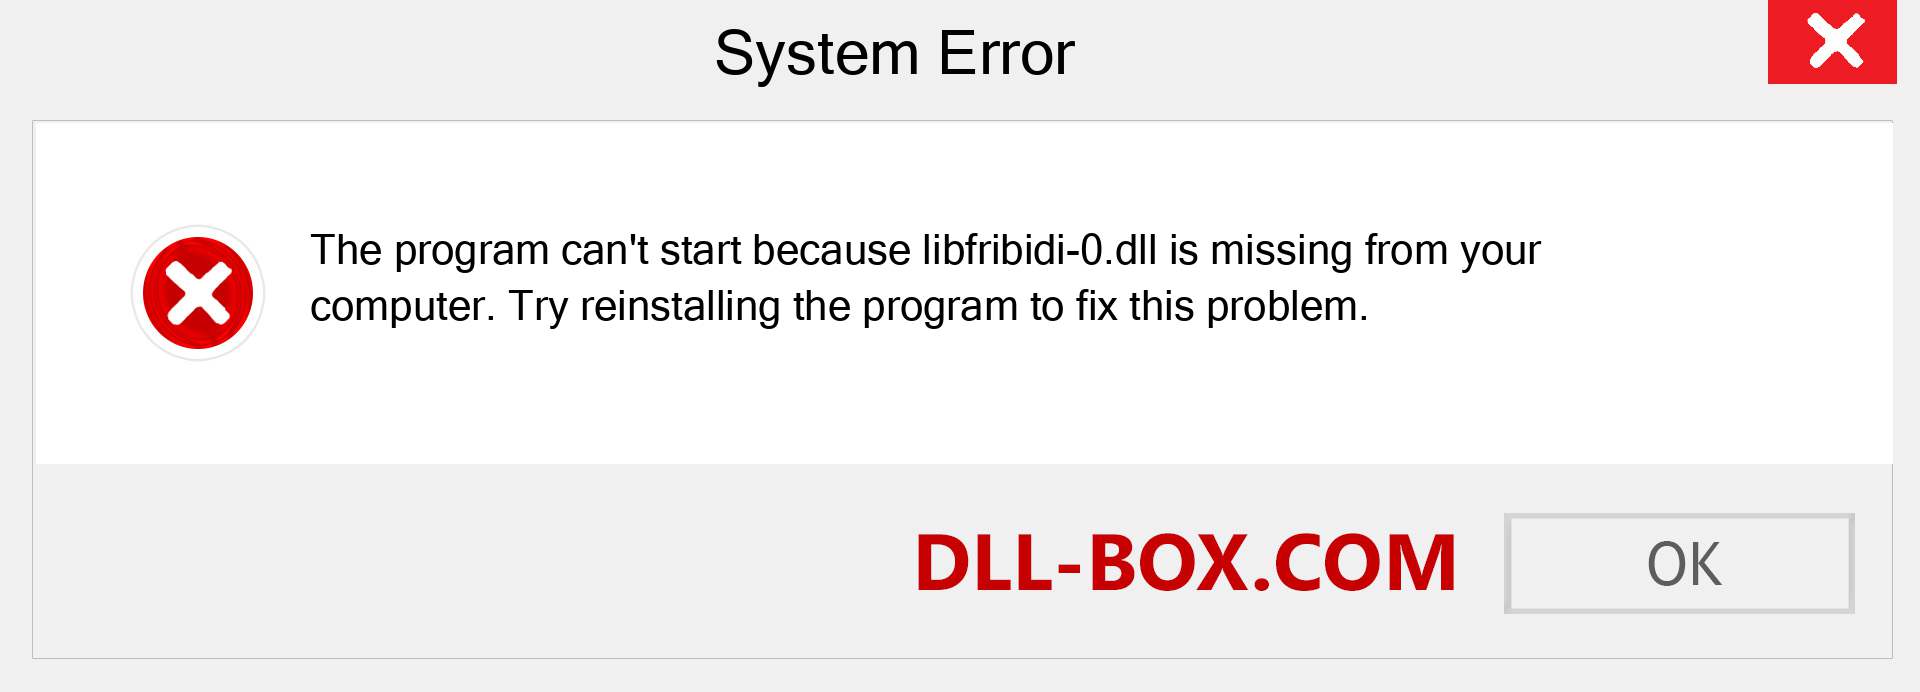  libfribidi-0.dll file is missing?. Download for Windows 7, 8, 10 - Fix  libfribidi-0 dll Missing Error on Windows, photos, images